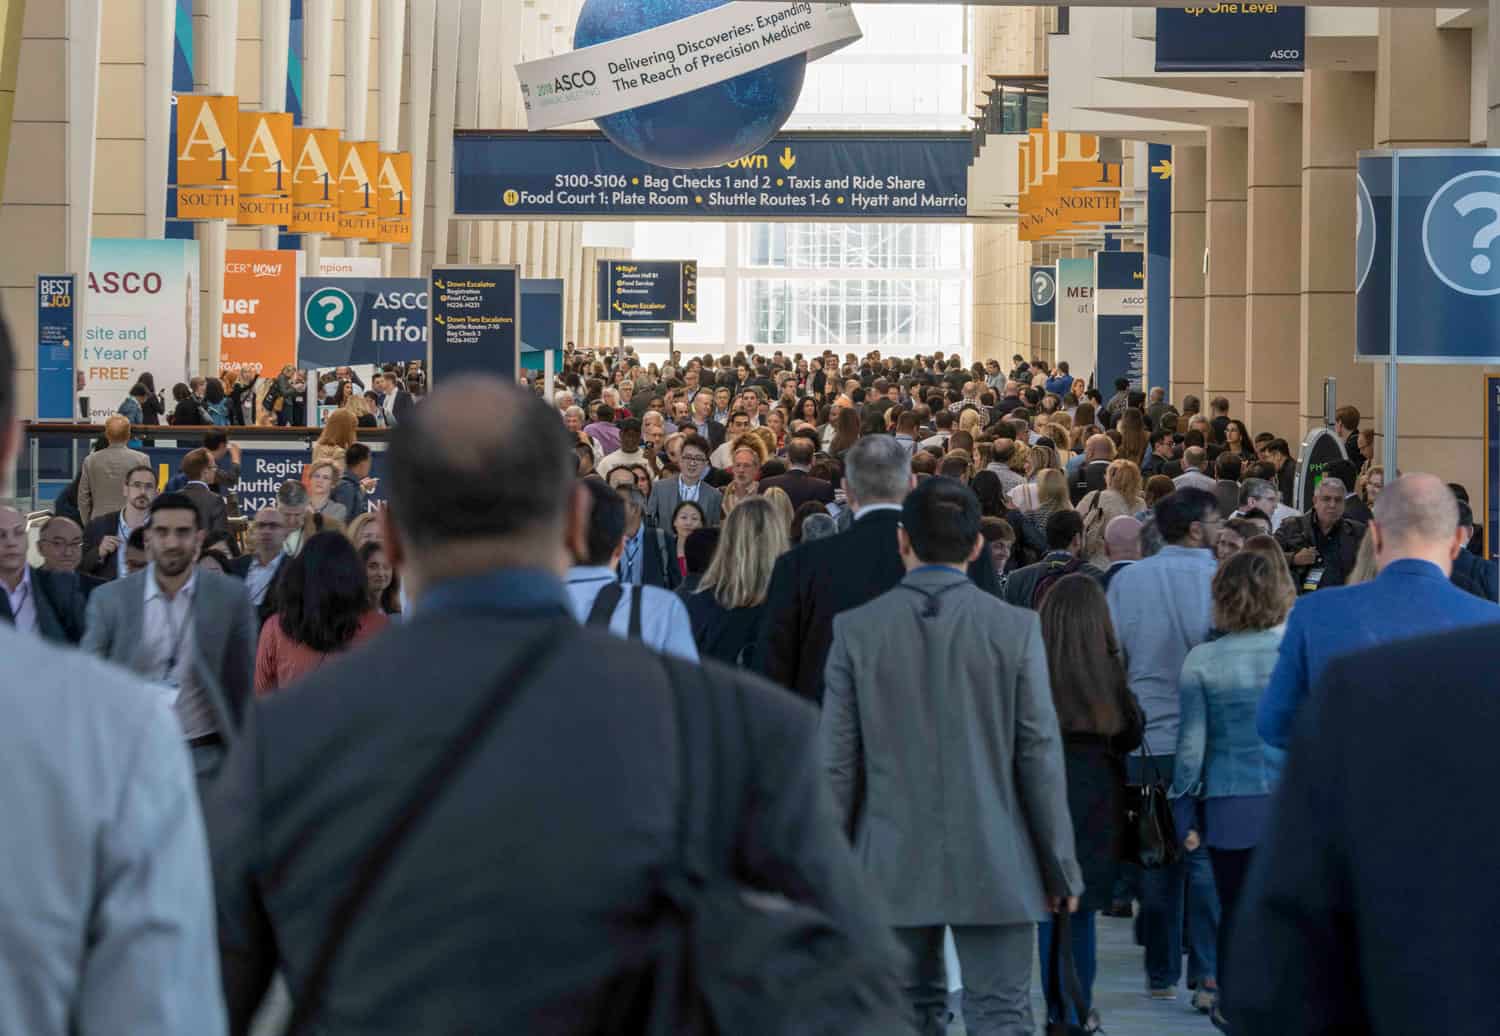 People heading towards sessions at ASCO 2018